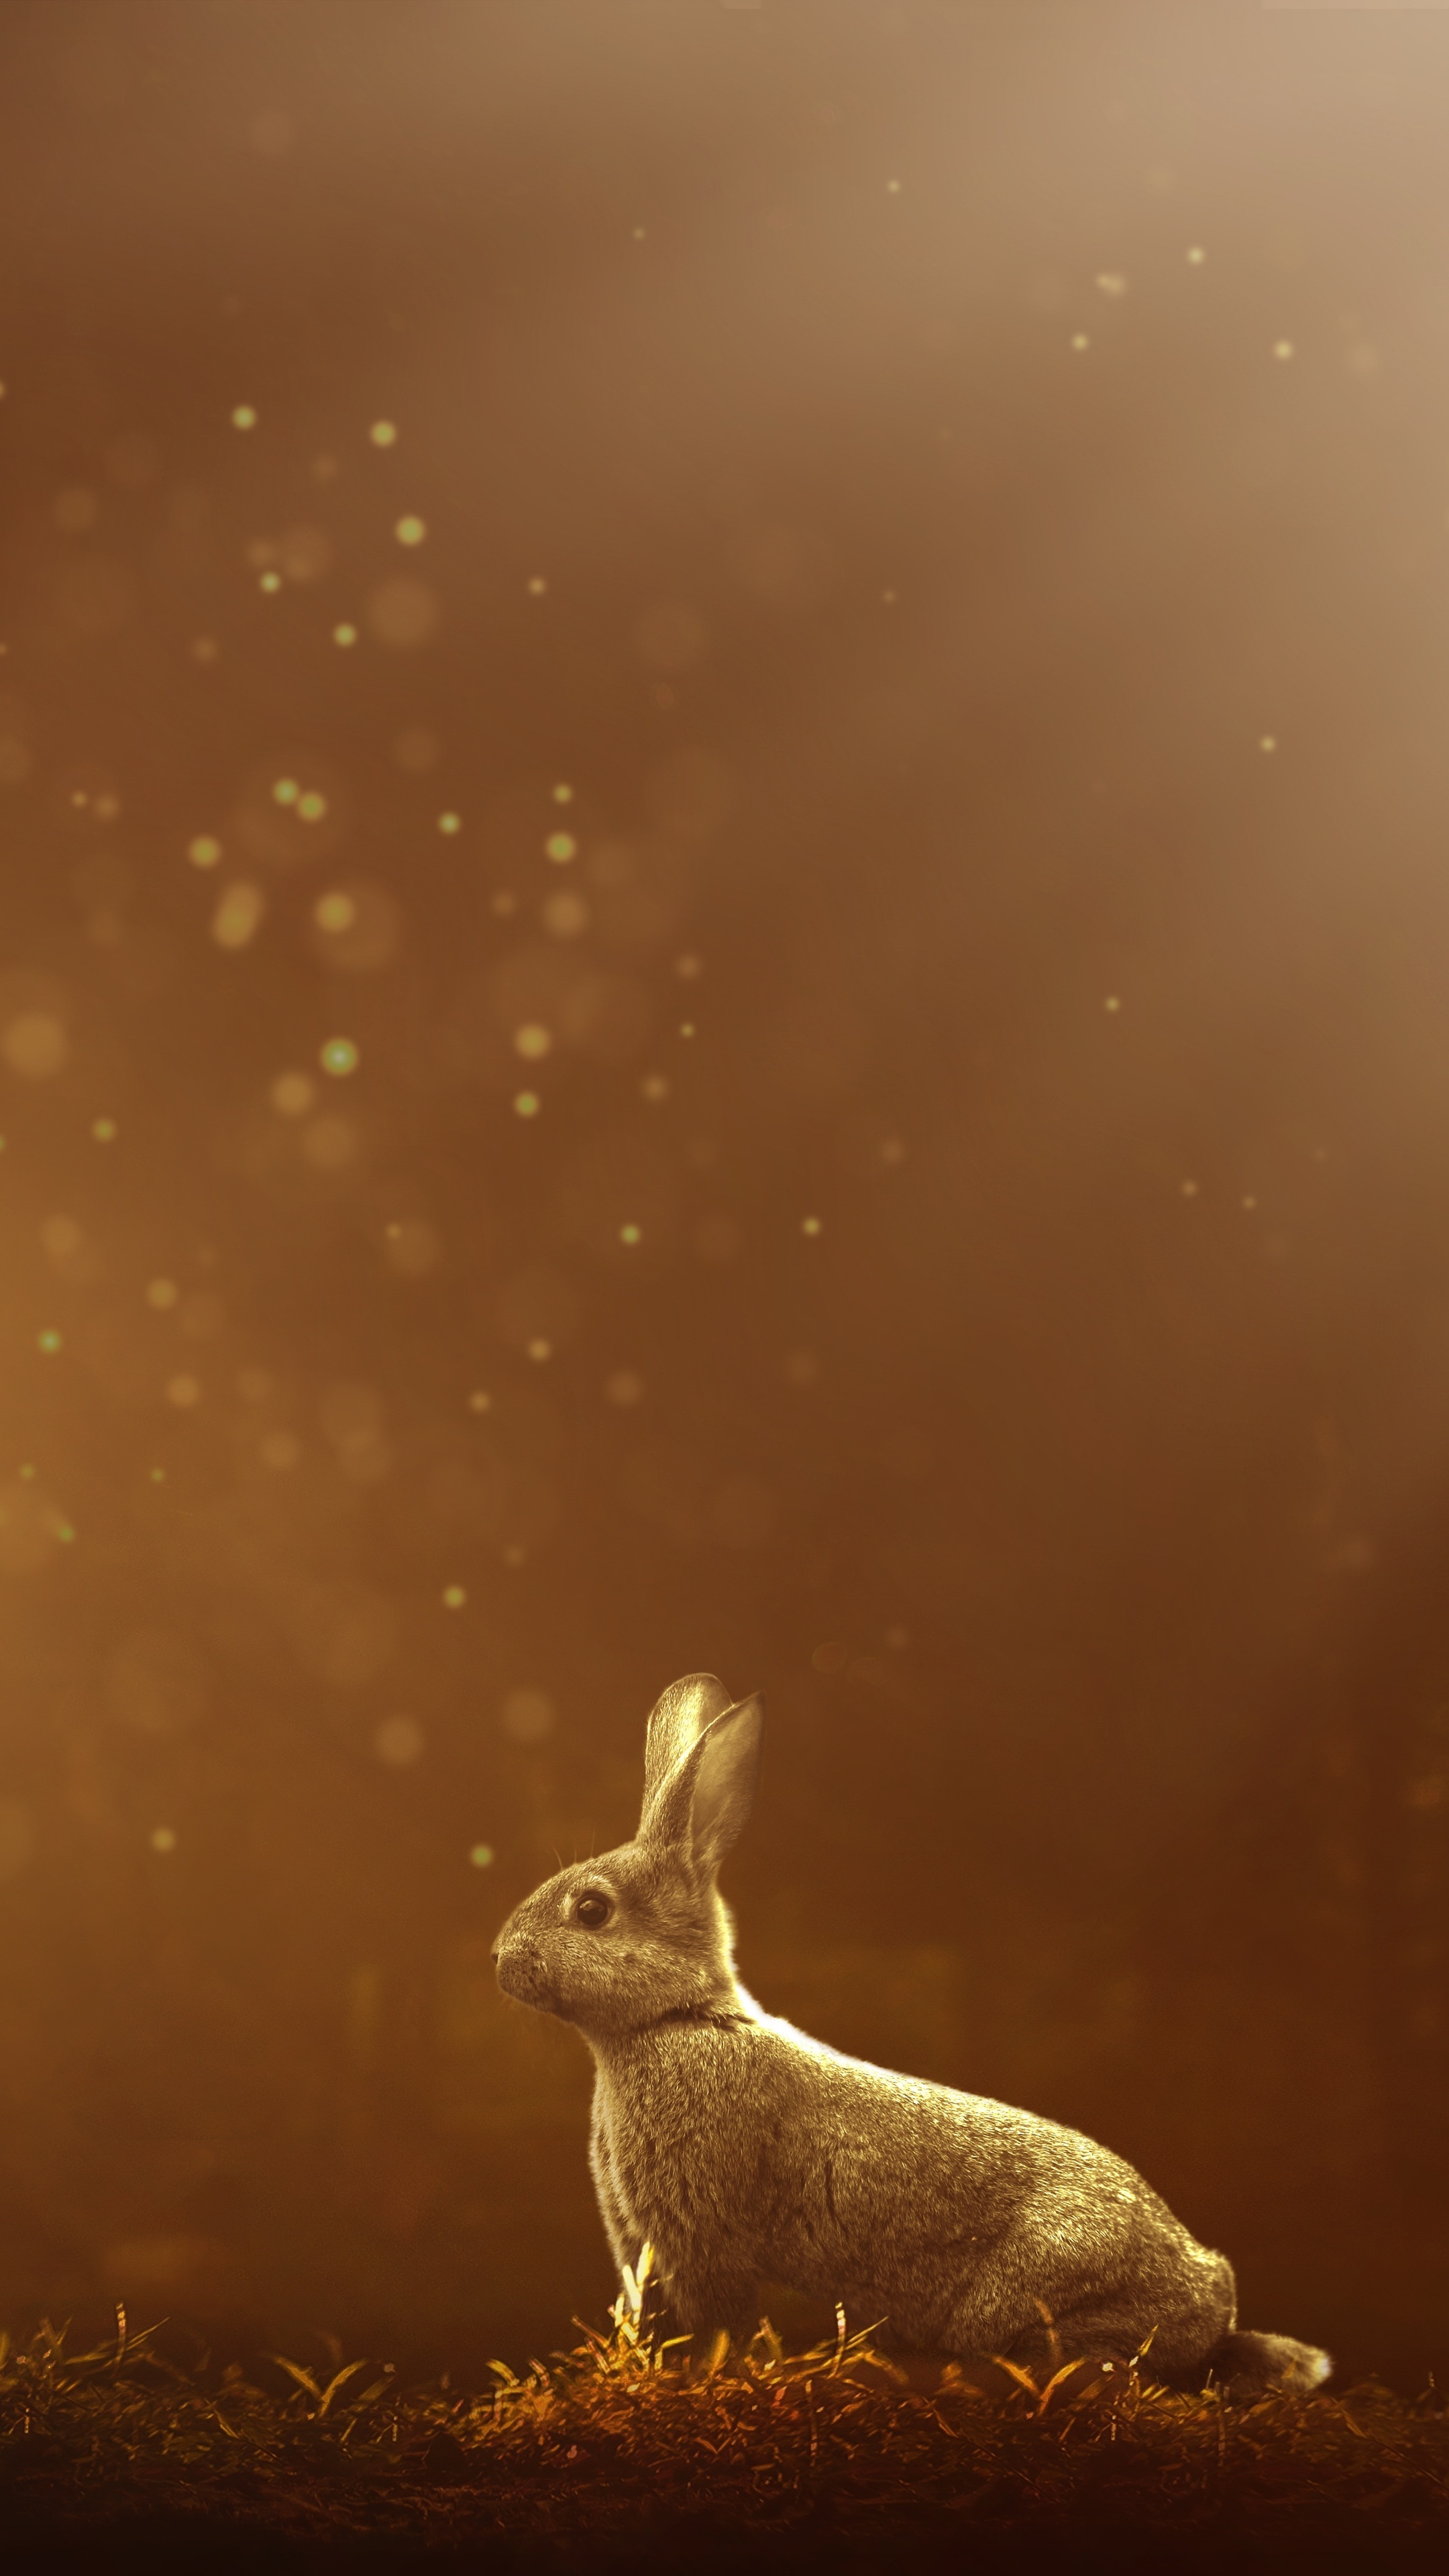 Rabbit wallpapers, Sony Xperia wallpapers, HD/4K images, Stunning bunny pictures, 2160x3840 4K Handy